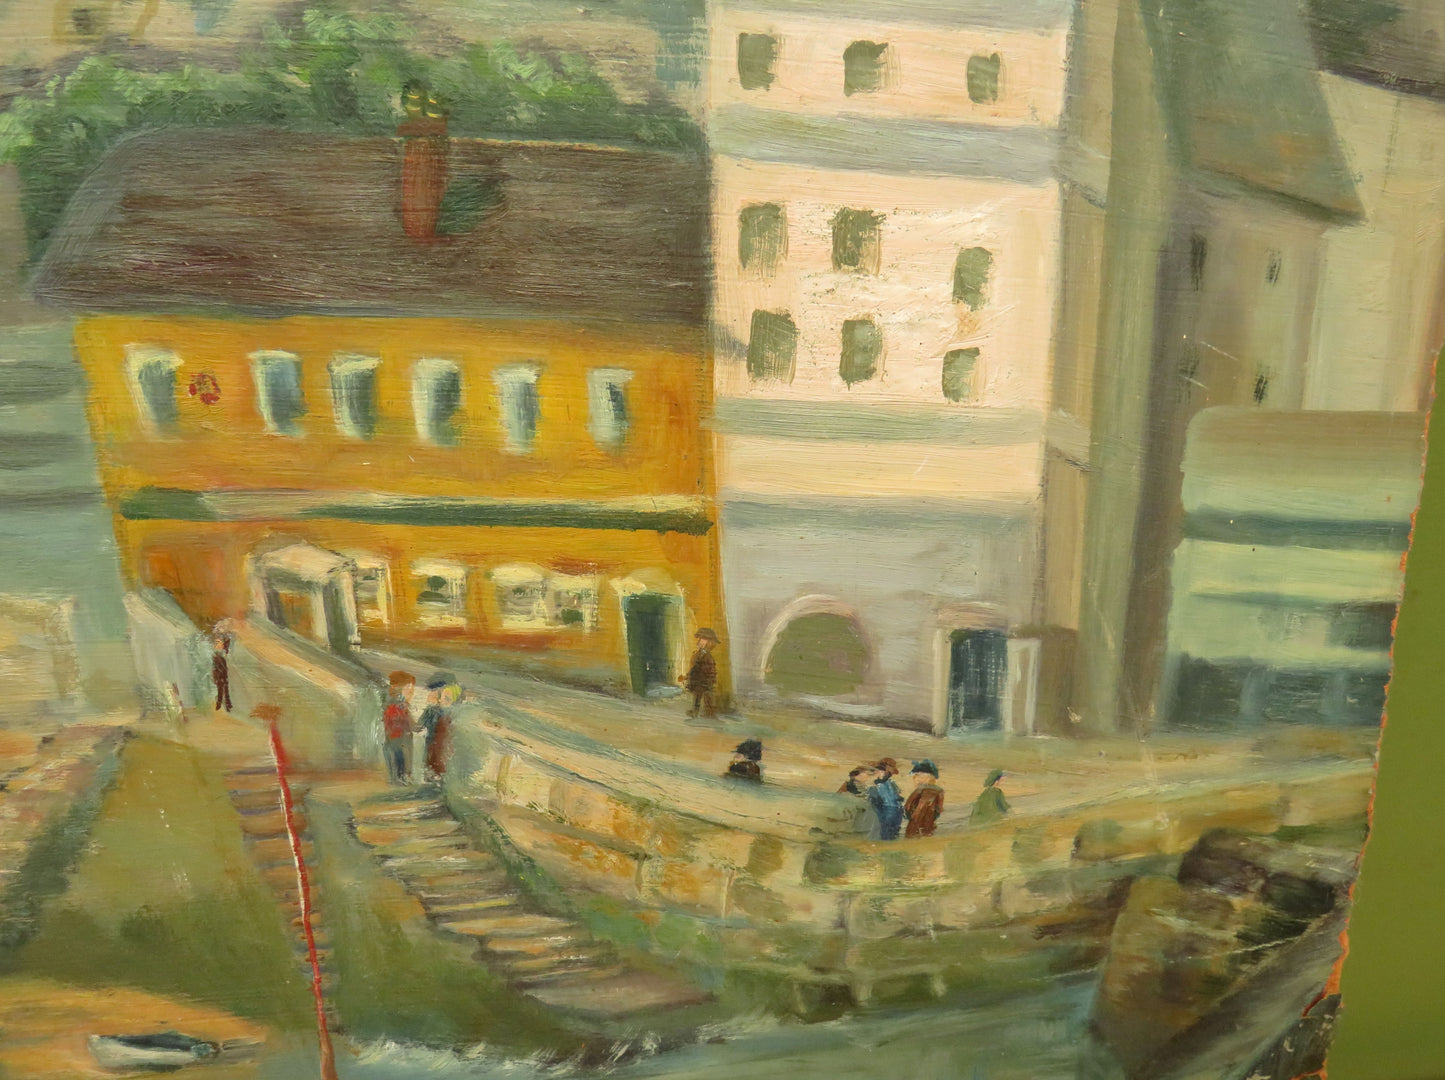 Vintage Naive Acrylic on Board of Boats and Harbour